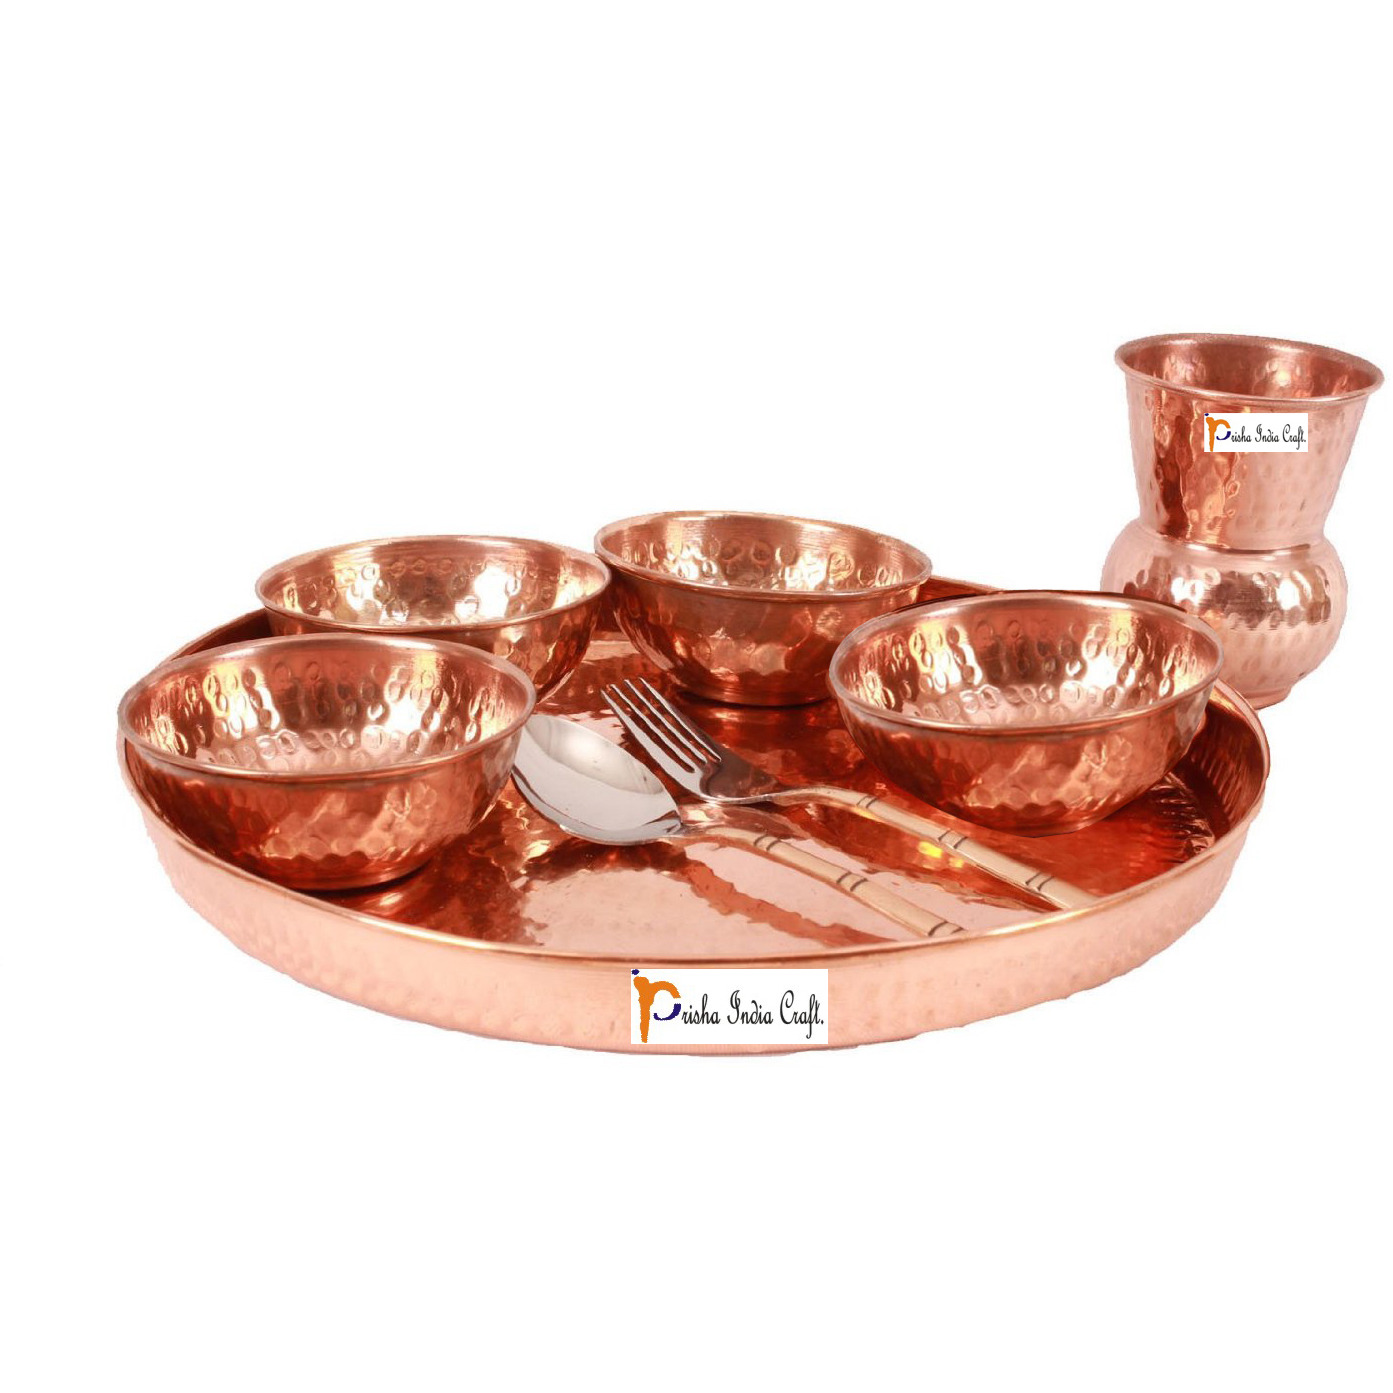 Prisha India Craft B. Dinnerware Traditional 100% Pure Copper Dinner Set of Thali Plate, Bowls, Glass and Spoon, Dia 12  With 1 Embossed Stainless Steel Copper Pitcher Jug - Christmas Gift